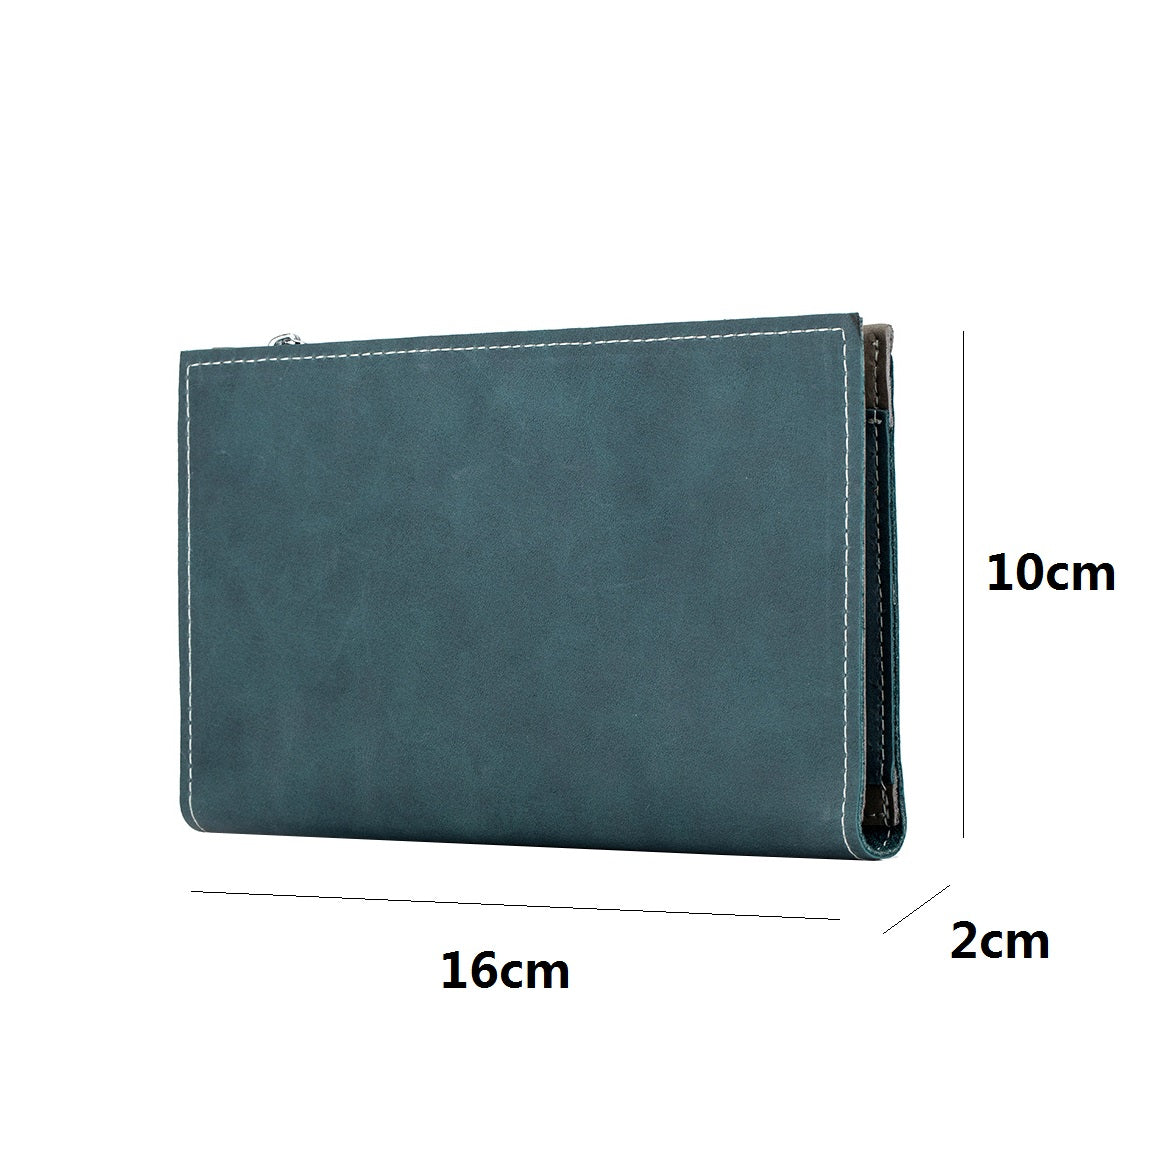 Unisex leather passport holder travel pouch with snap button